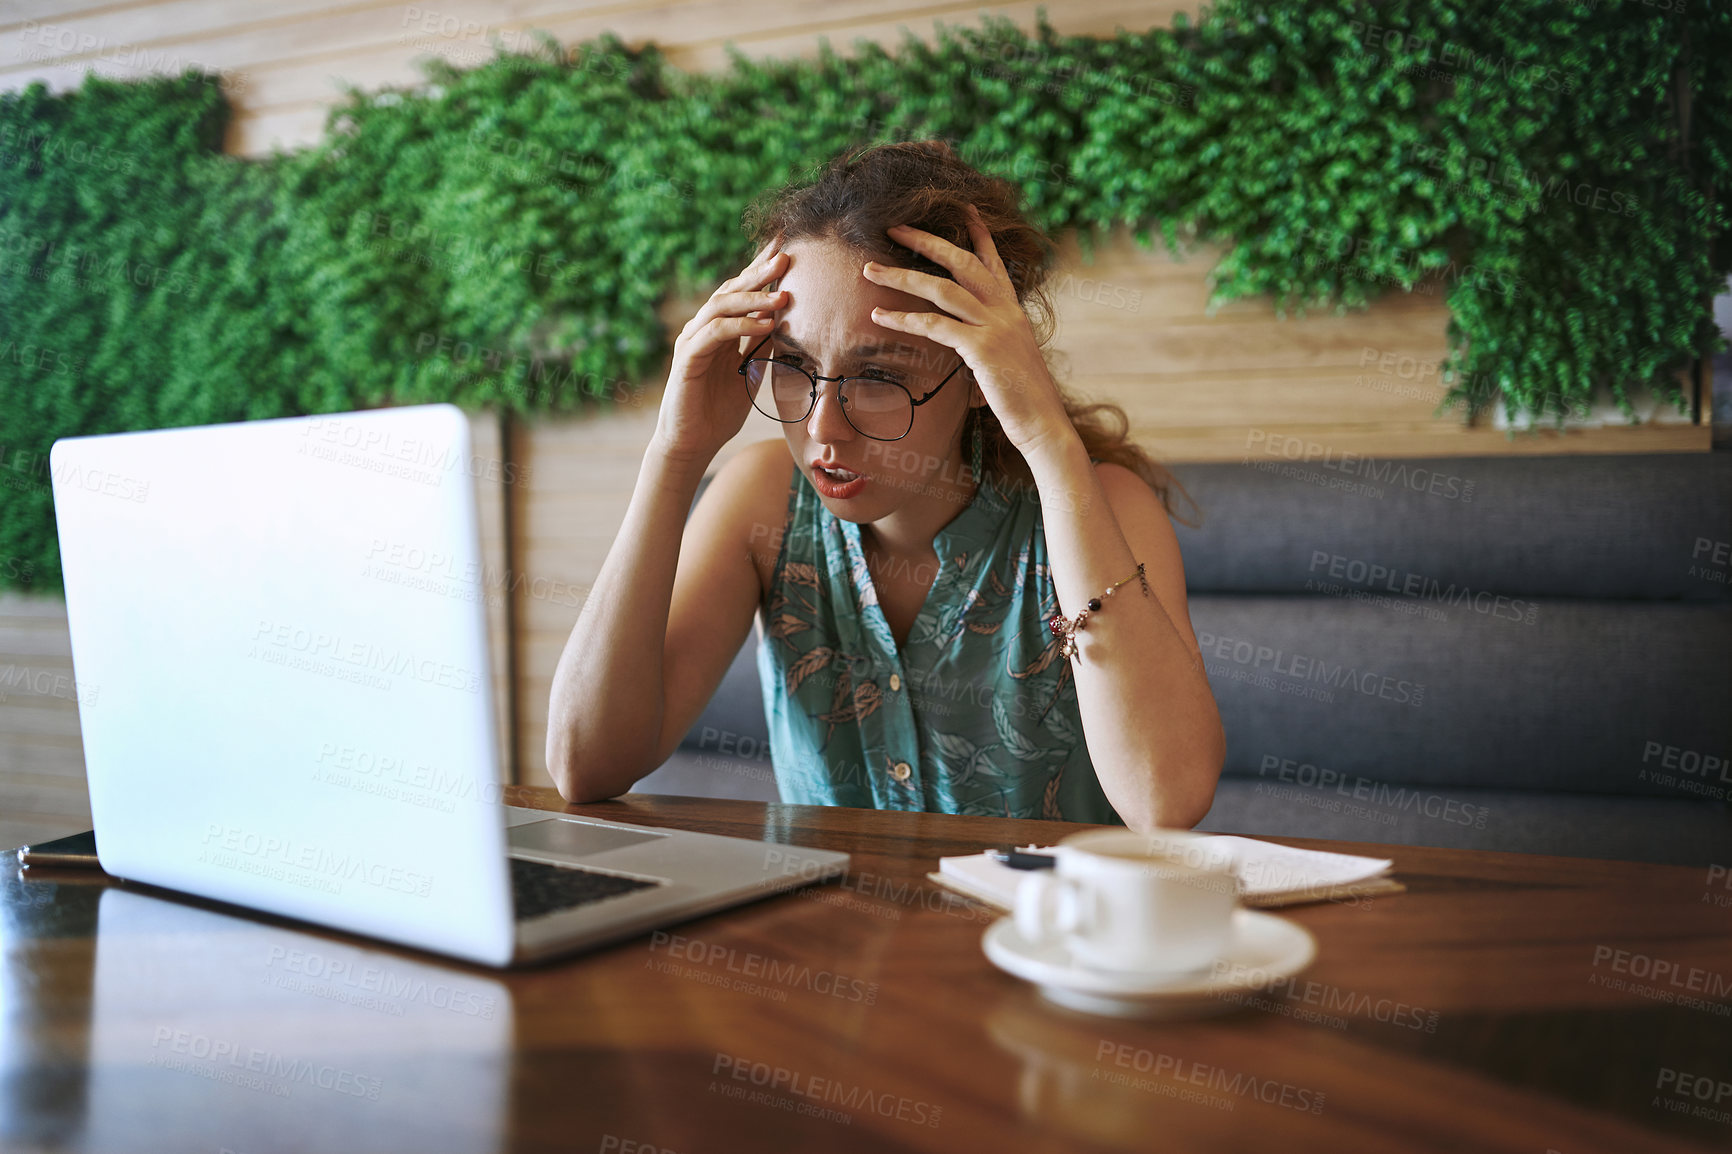 Buy stock photo Shot of a young woman using a laptop and looking stressed while working at a cafe